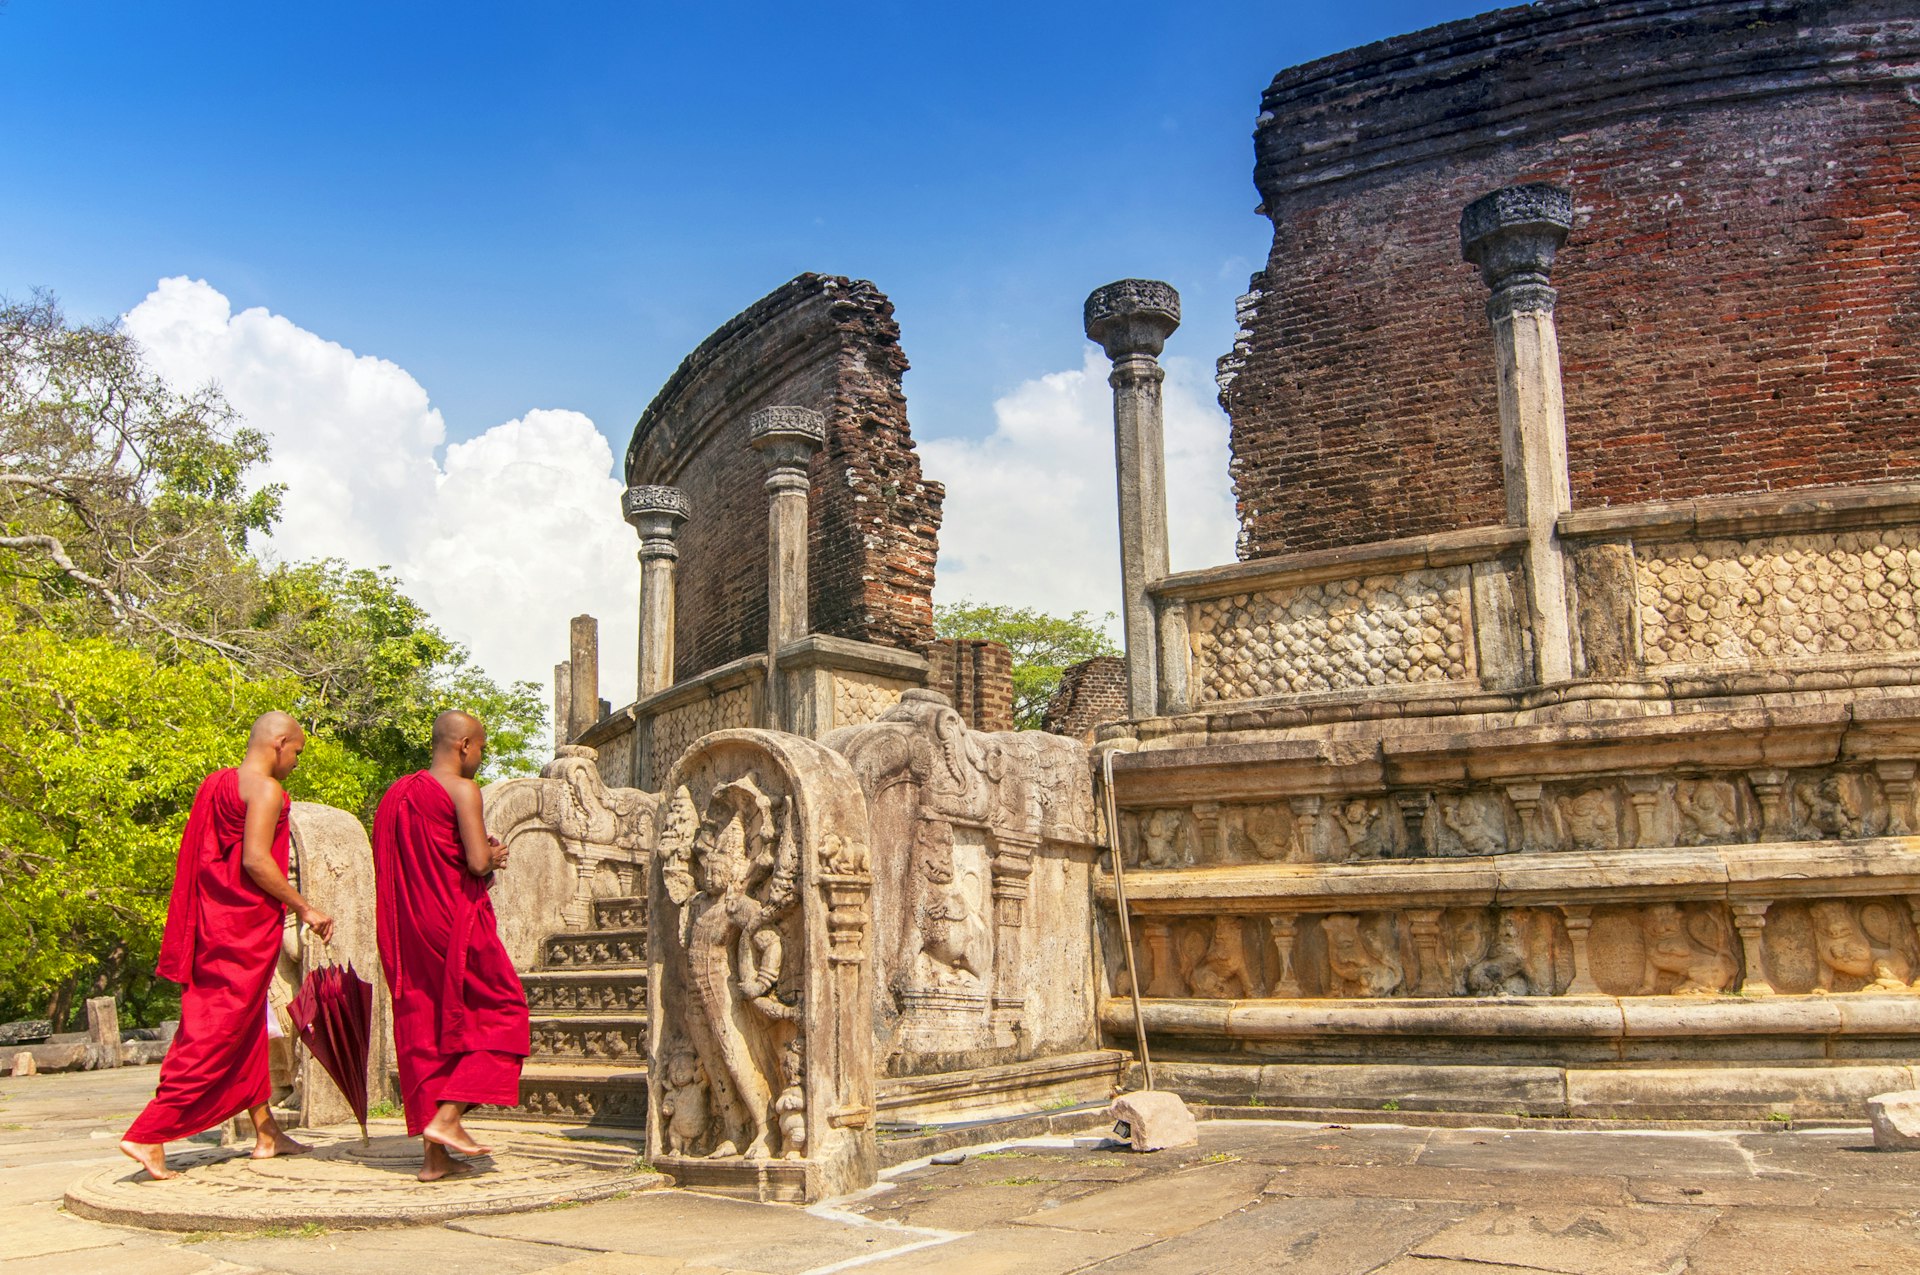 Monks in the ruins of Polonnaruwa